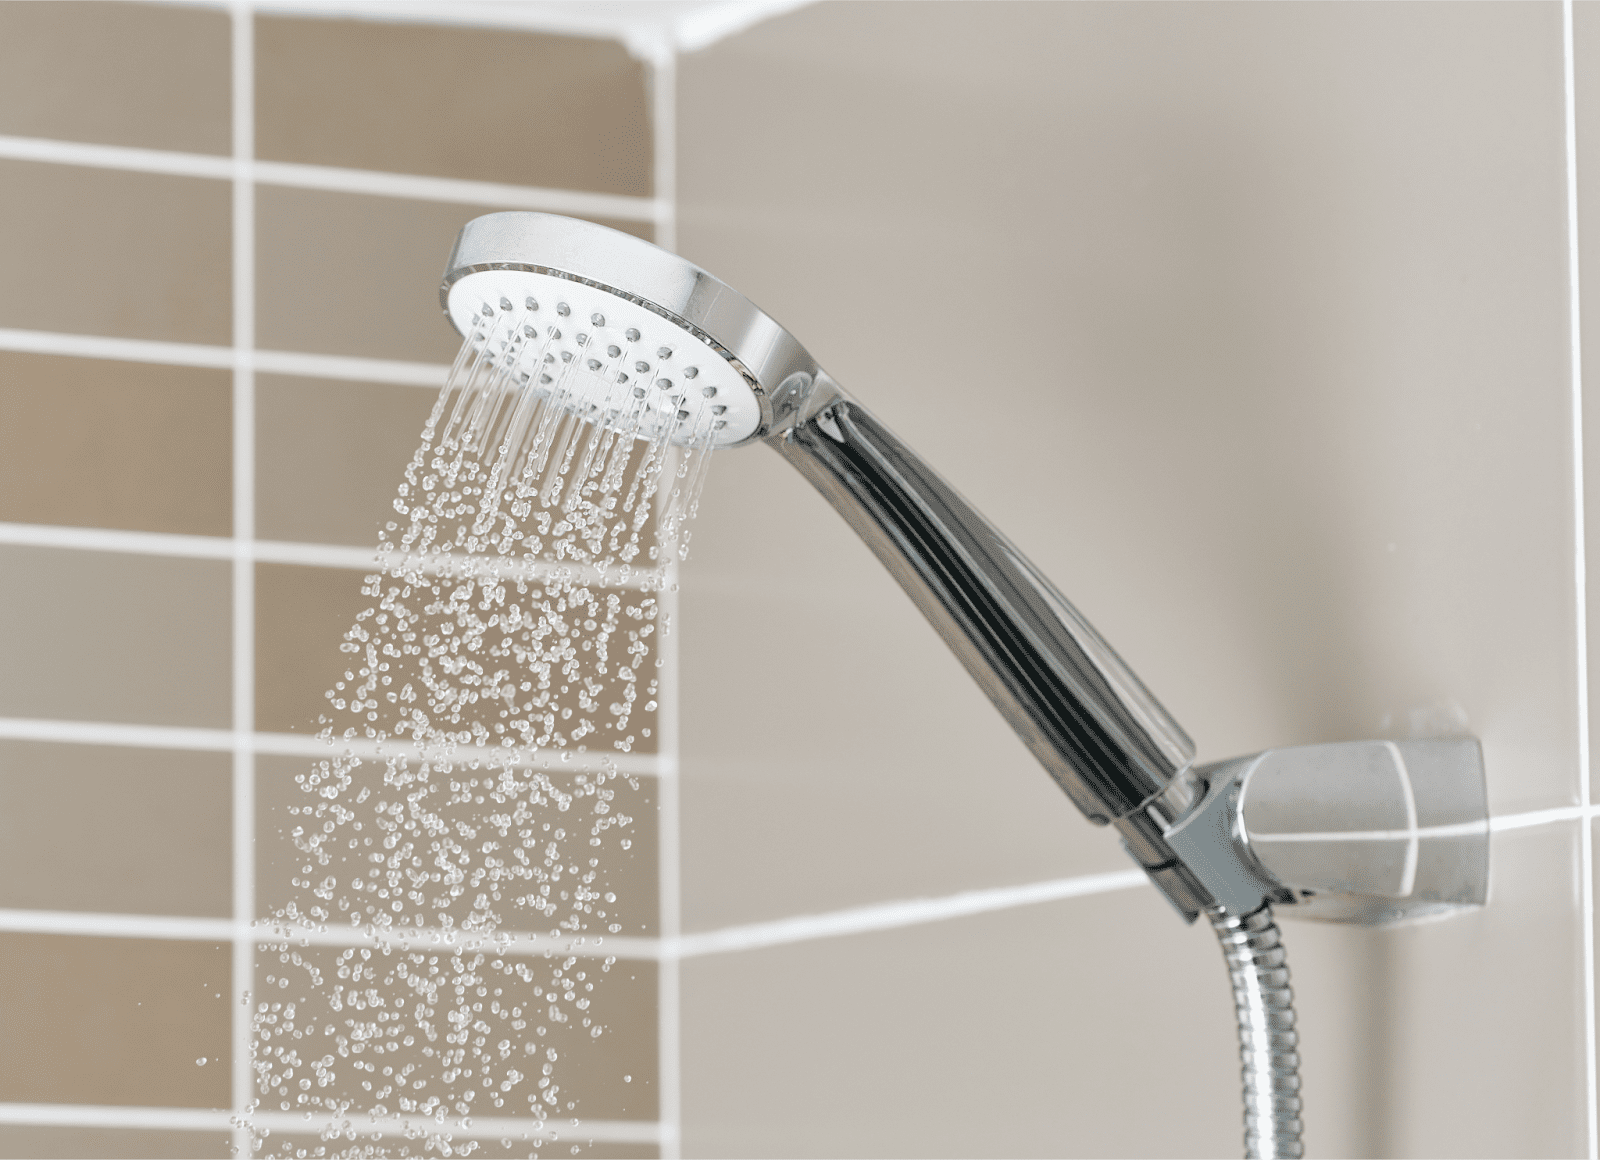 6 Surefire Tips to Solve Common Shower Plumbing Problems in Your Home